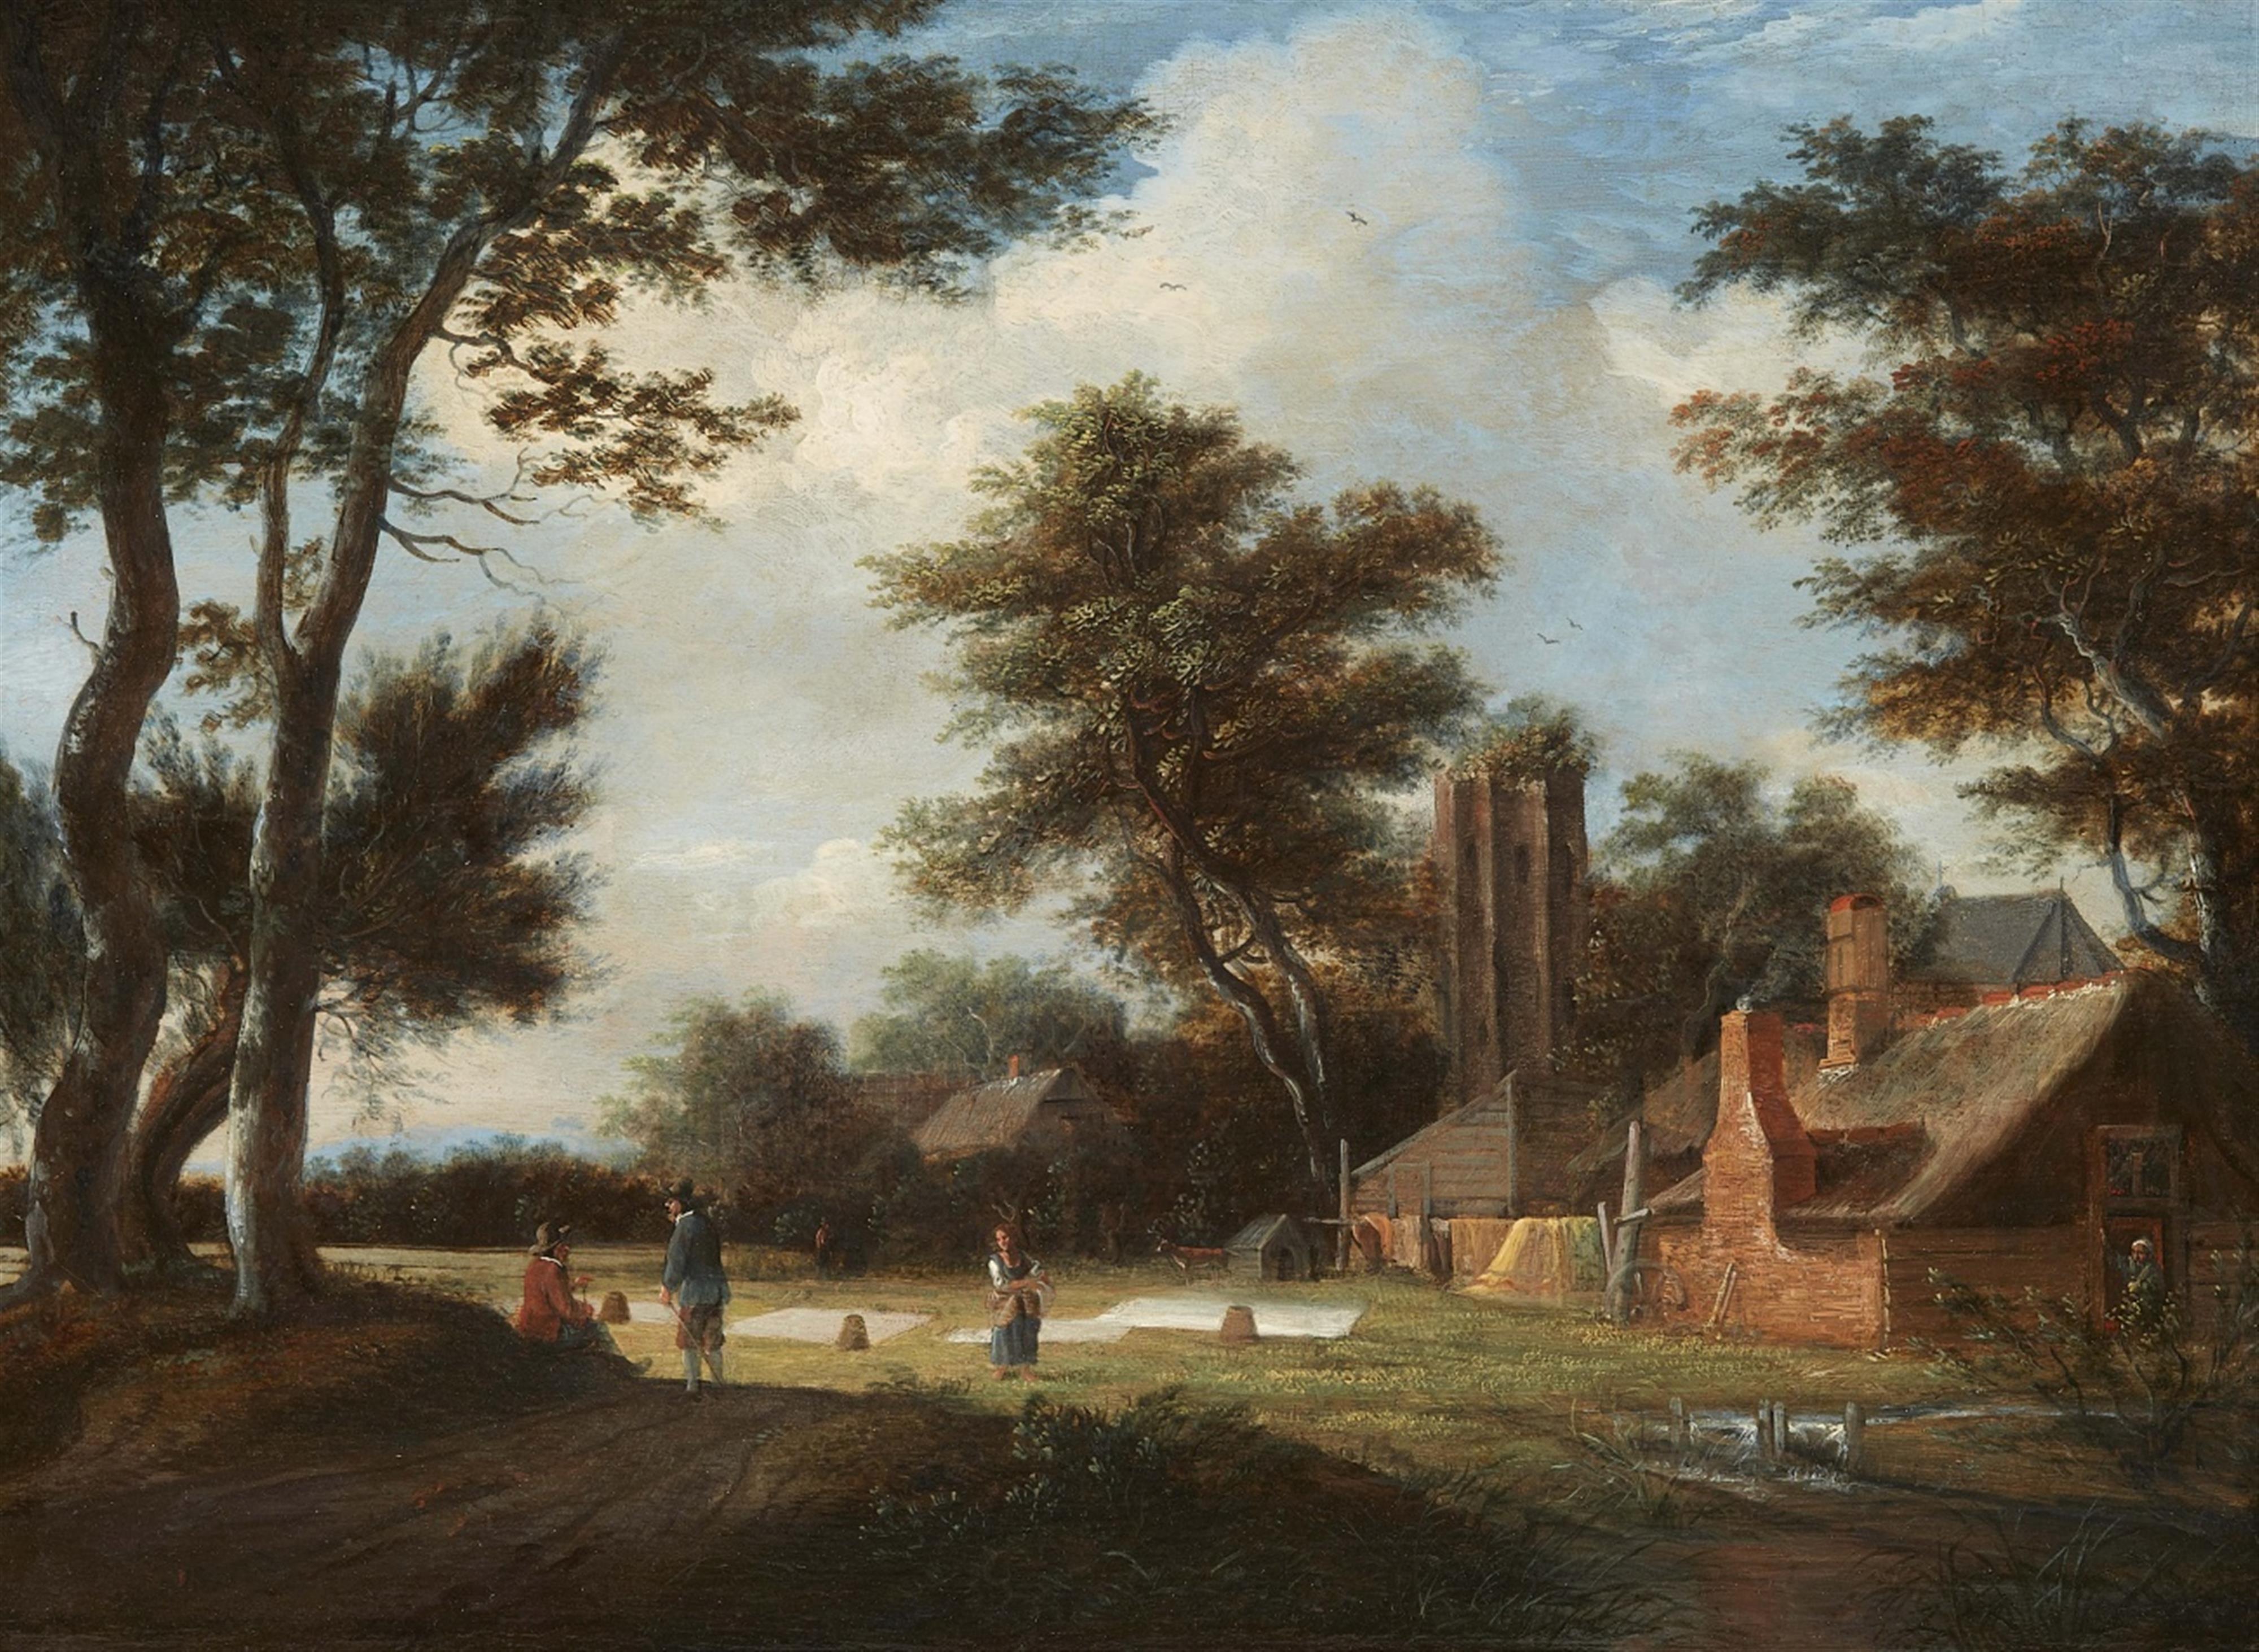 Netherlandish School 17th century - Landscape with Figures and a Farm - image-1